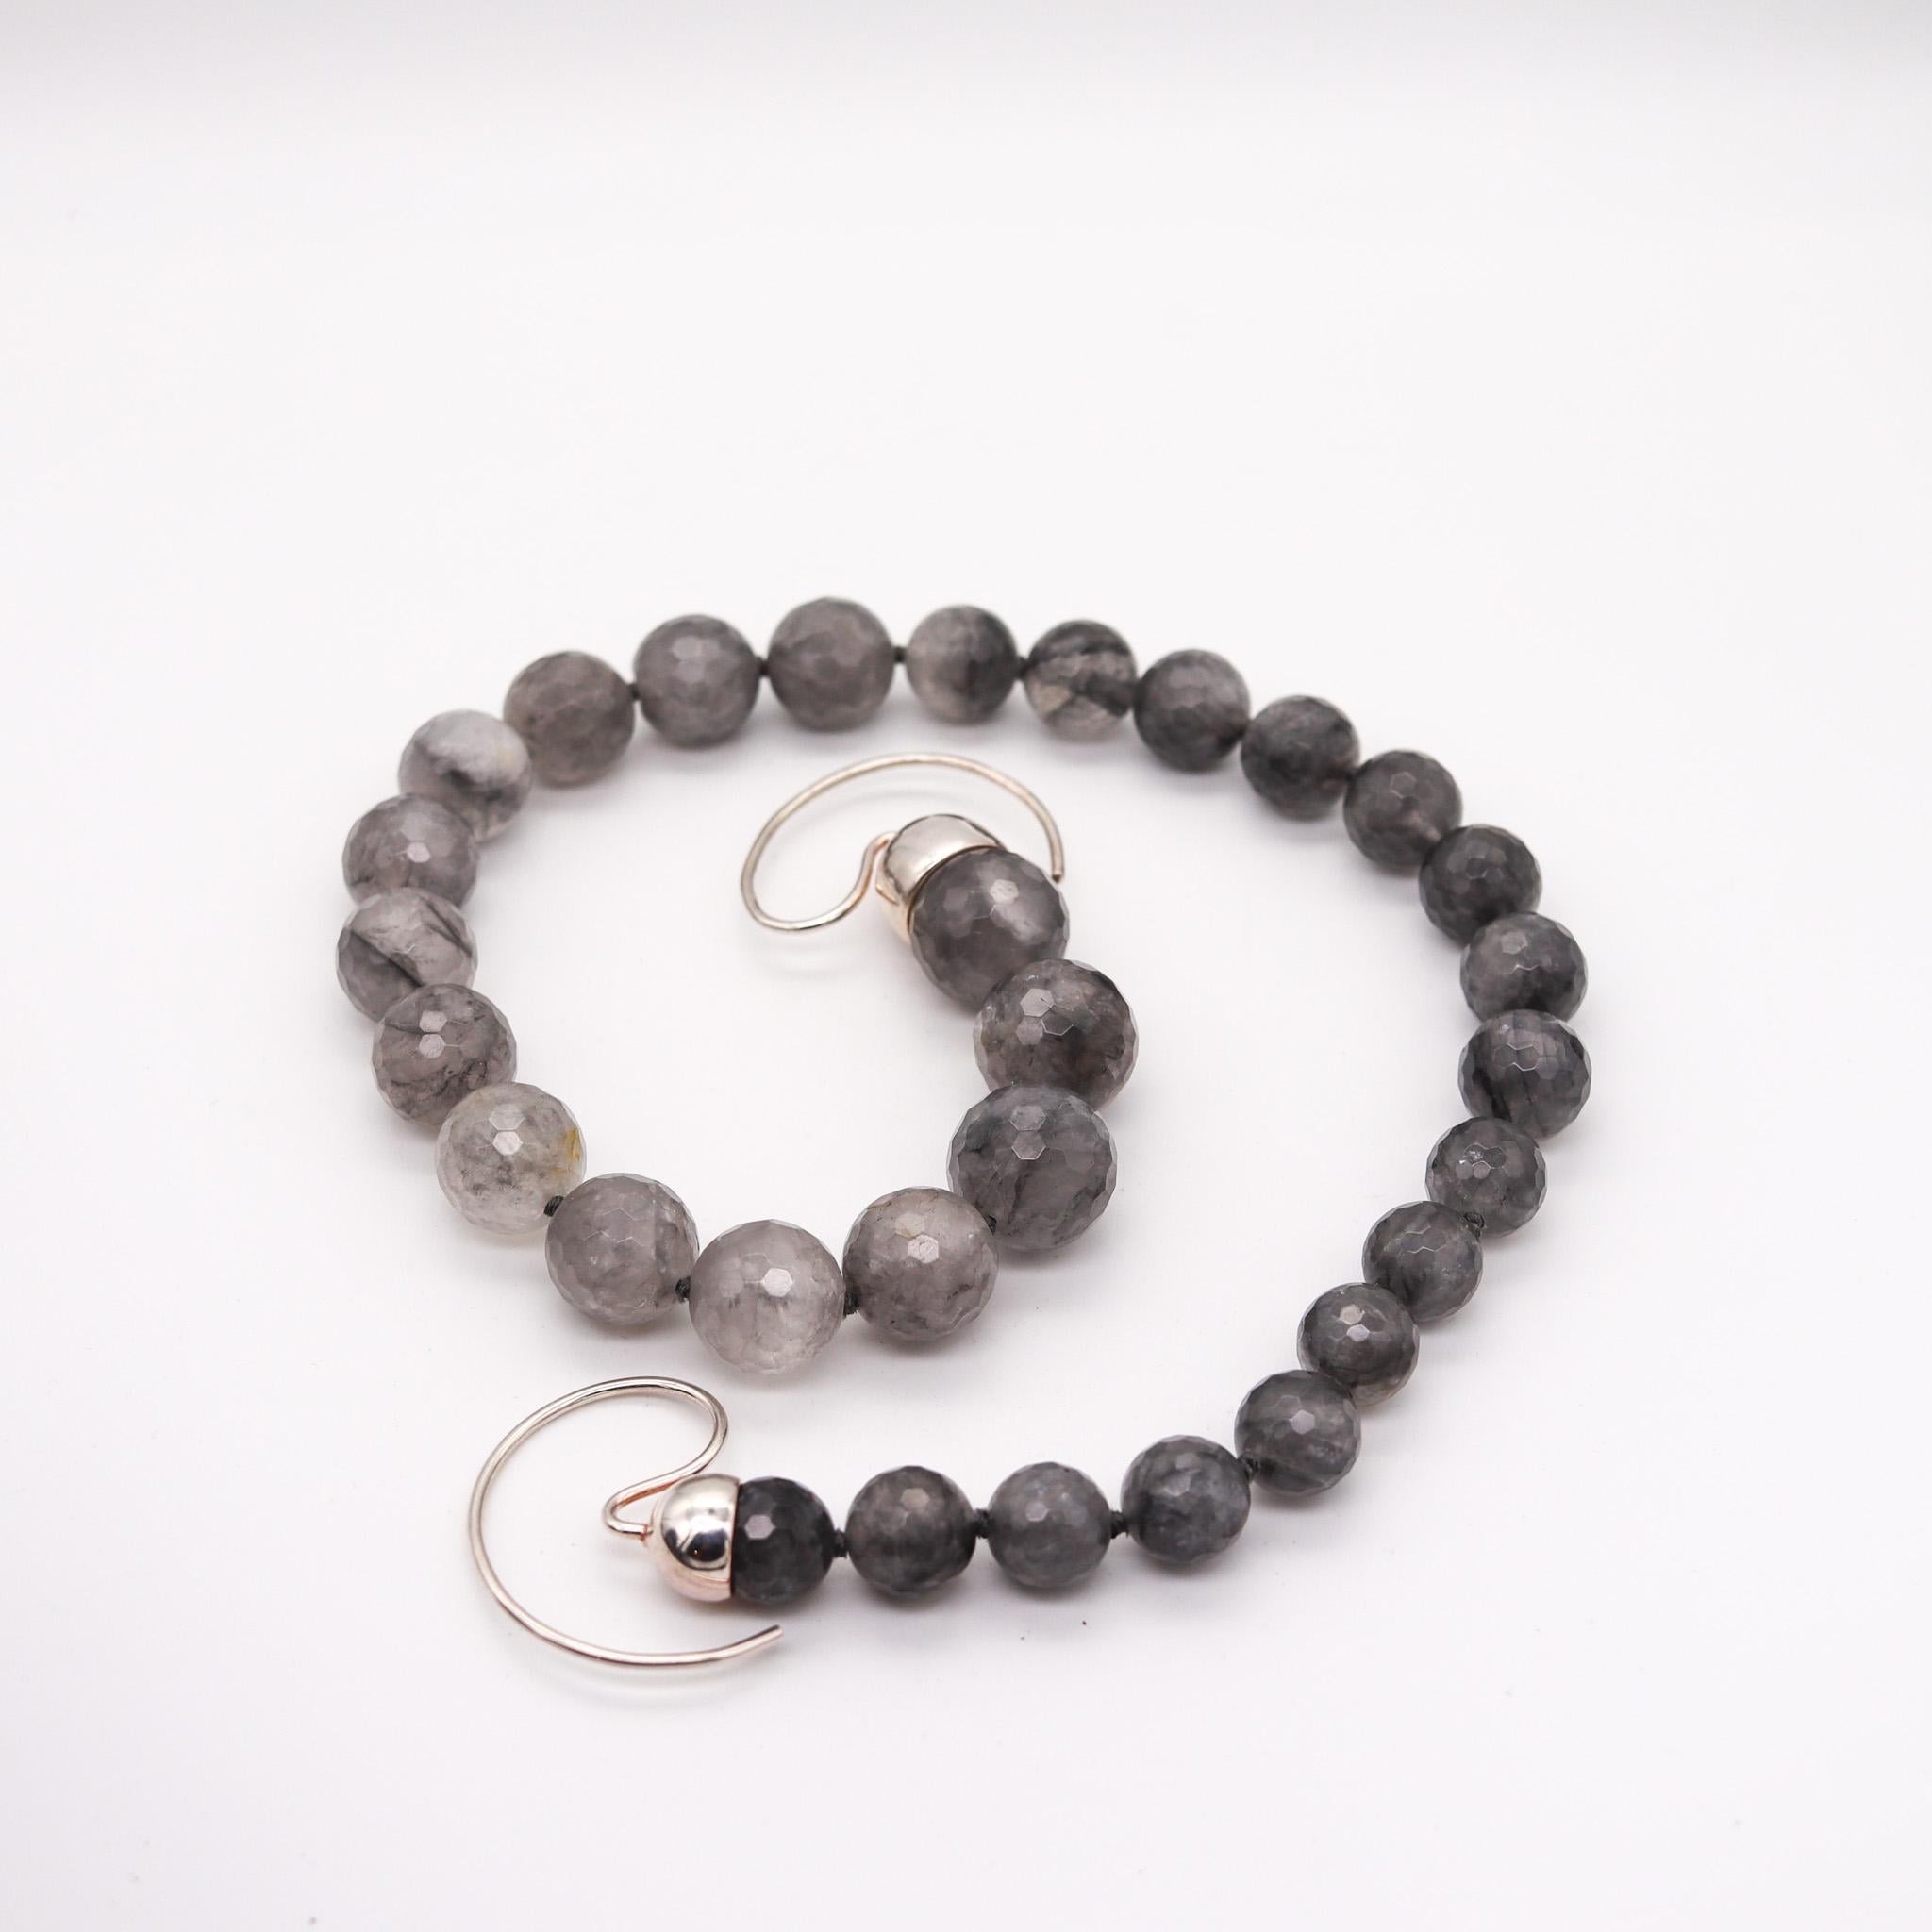 Women's Monica Coscioni Roma Faceted Gray Agate Bead Necklace In .925 Sterling Silver For Sale